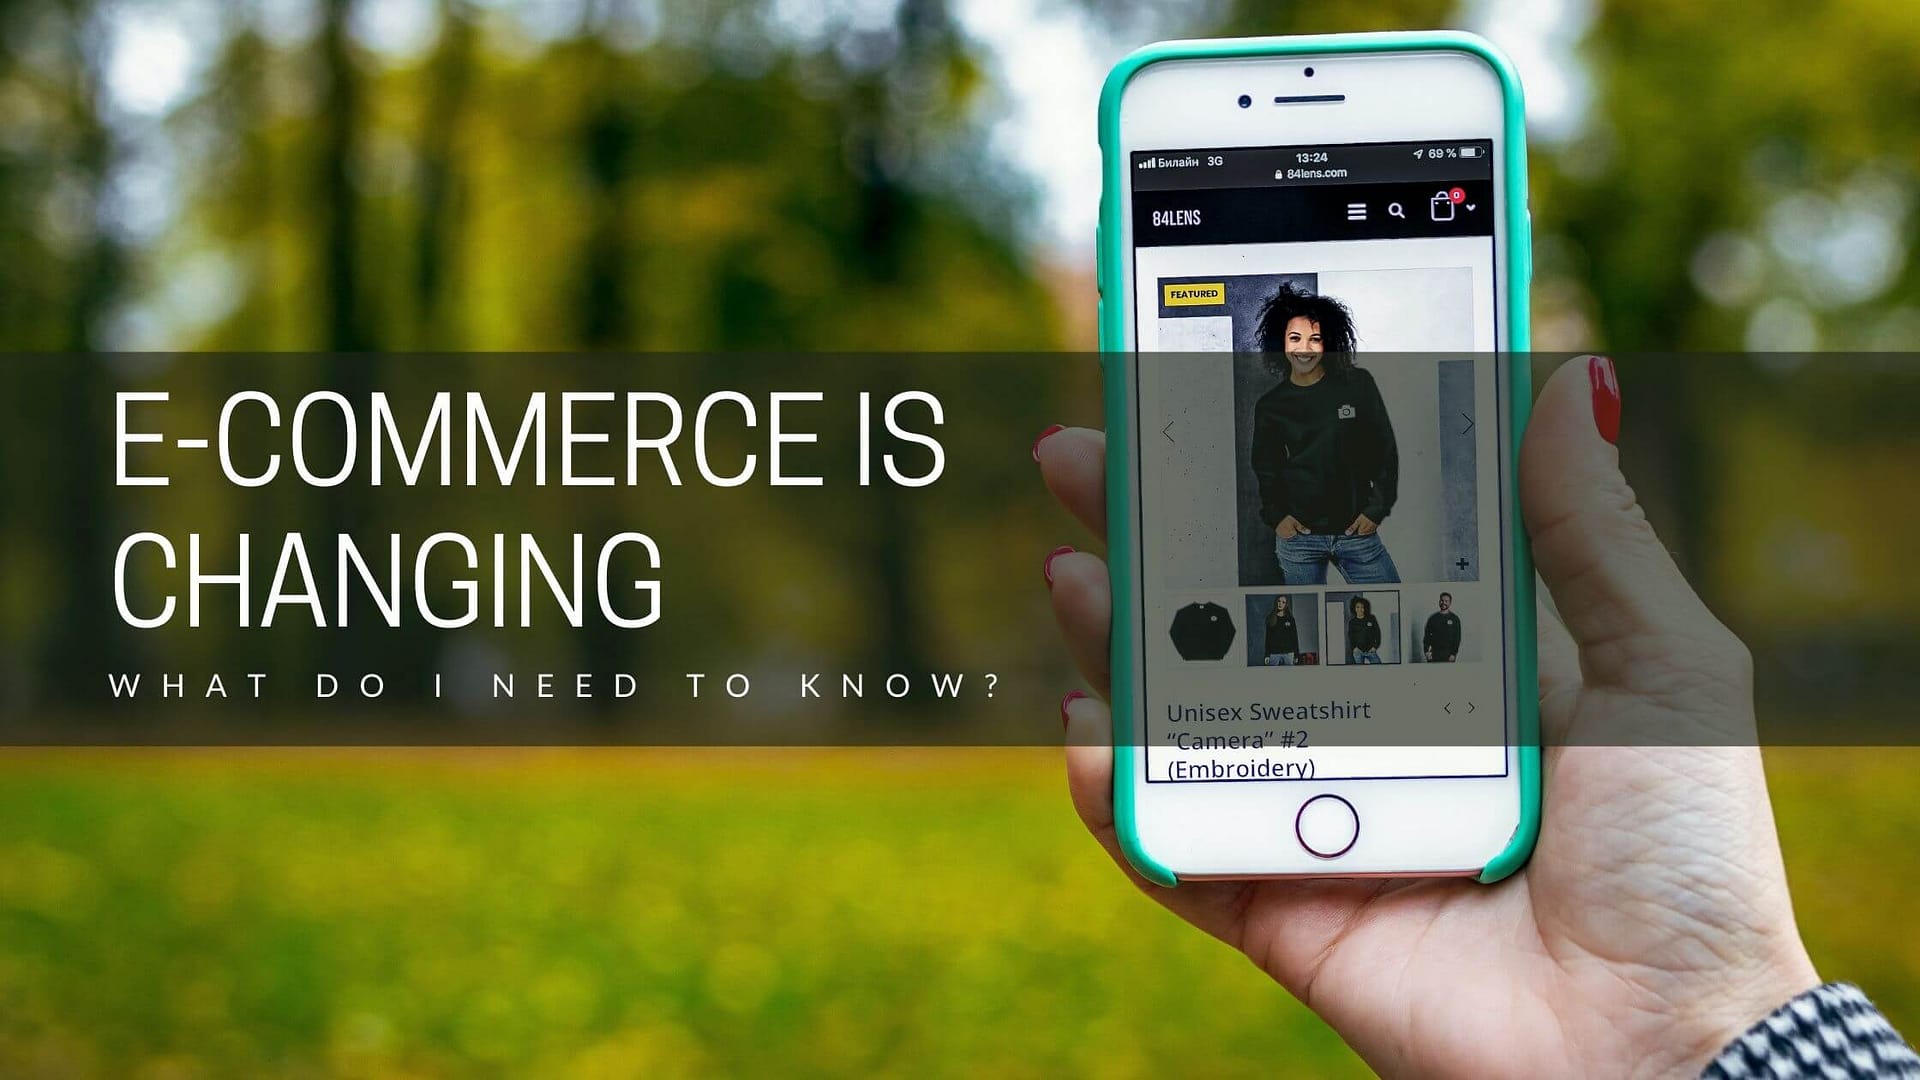 E-Commerce is Changing. What Do I Need to Know?